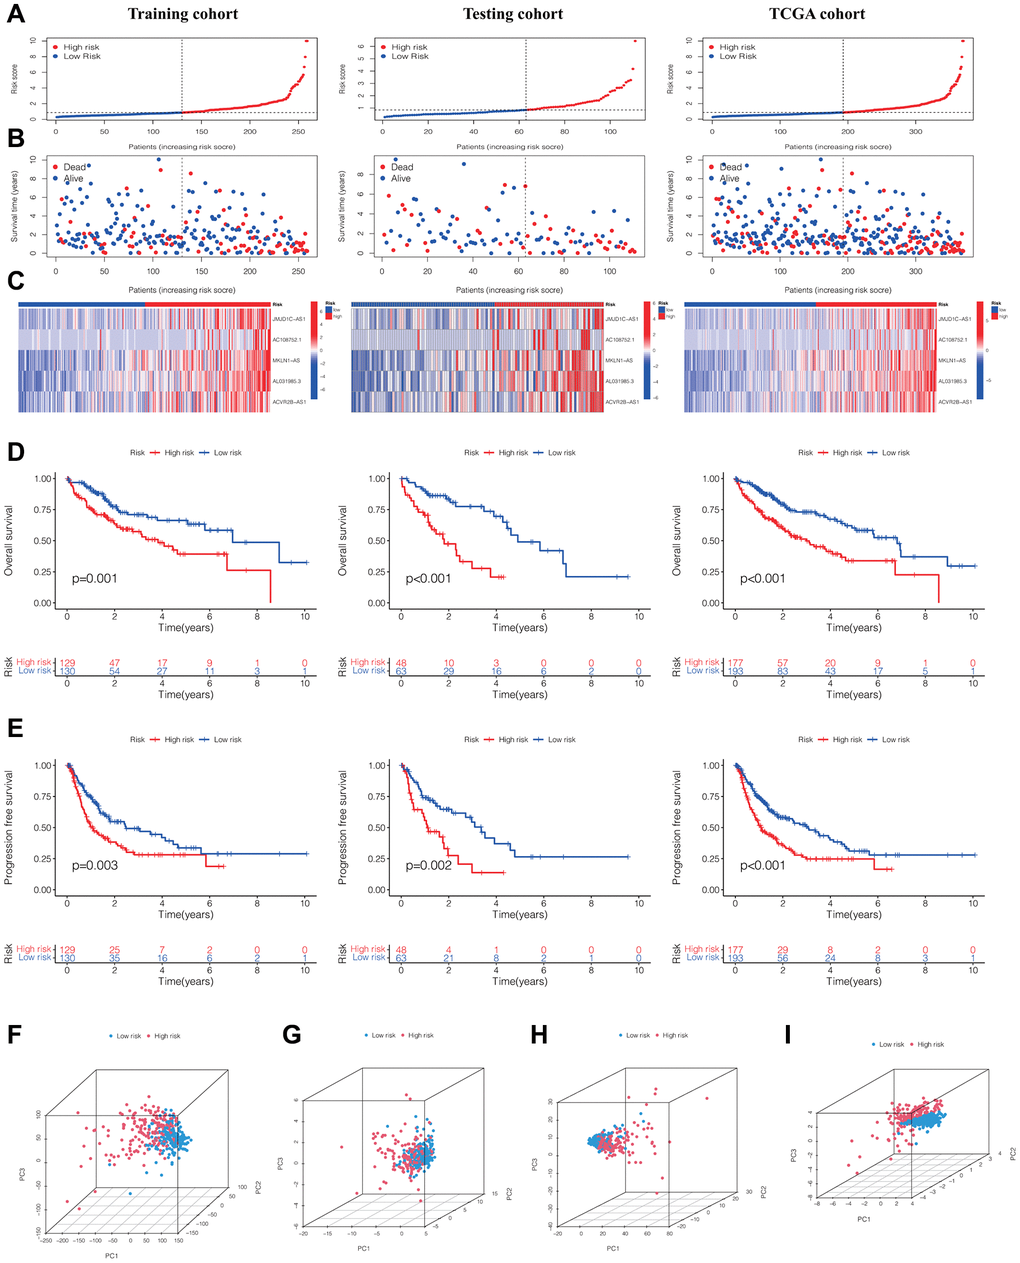 Evaluation and validation of the DRLs signature in the training, testing, and TCGA cohorts. (A) Distribution of normalized DRLs risk scores. (B) Survival status and survival time in relation to DRLs risk scores. (C) Heatmaps showing high- and low-risk groups. Kaplan-Meier analyses of OS (D) and PFS (E) for high- and low-risk groups. (F) PCA analysis of all genes. (G) PCA analysis of DRGs. (H) PCA analysis of all DRLs. (I) PCA analysis of DRLs risk score. Abbreviations: DRLs: disulfidptosis-related lncRNAs; OS: overall survival; PFS: progression-free survival; PCA: principal component analysis; DRGs: disulfidptosis-related genes.